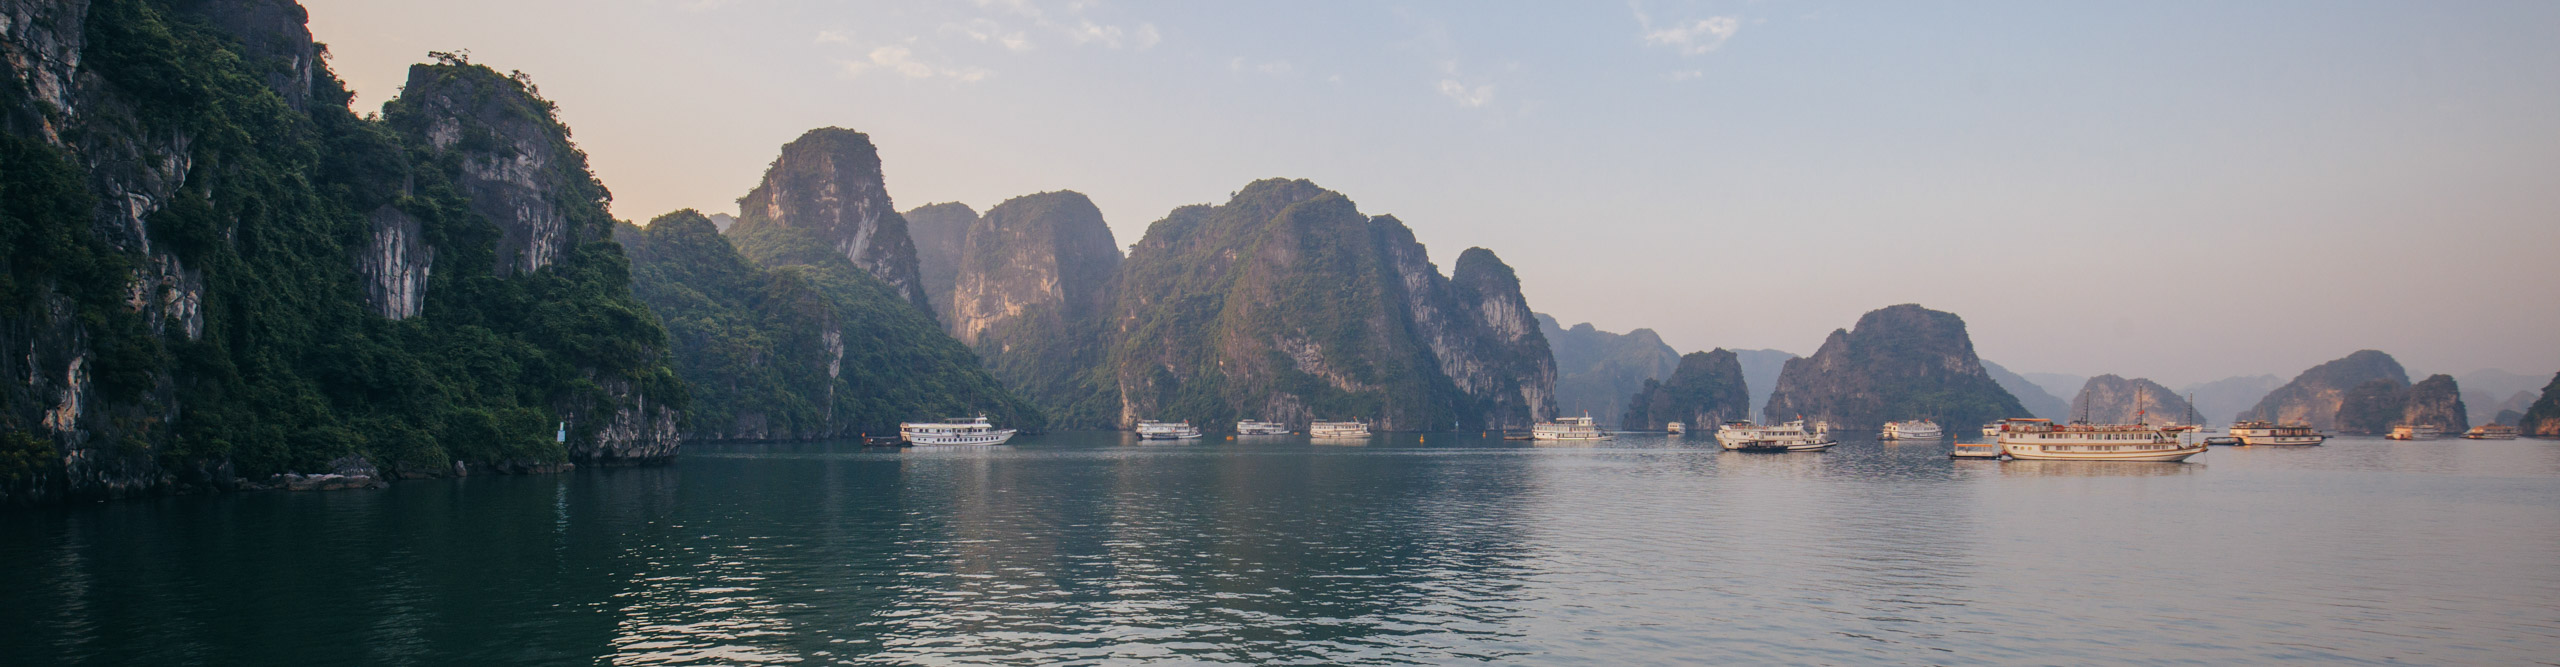 Lat afternoon sun over the islands of Halong bay, Vietnam